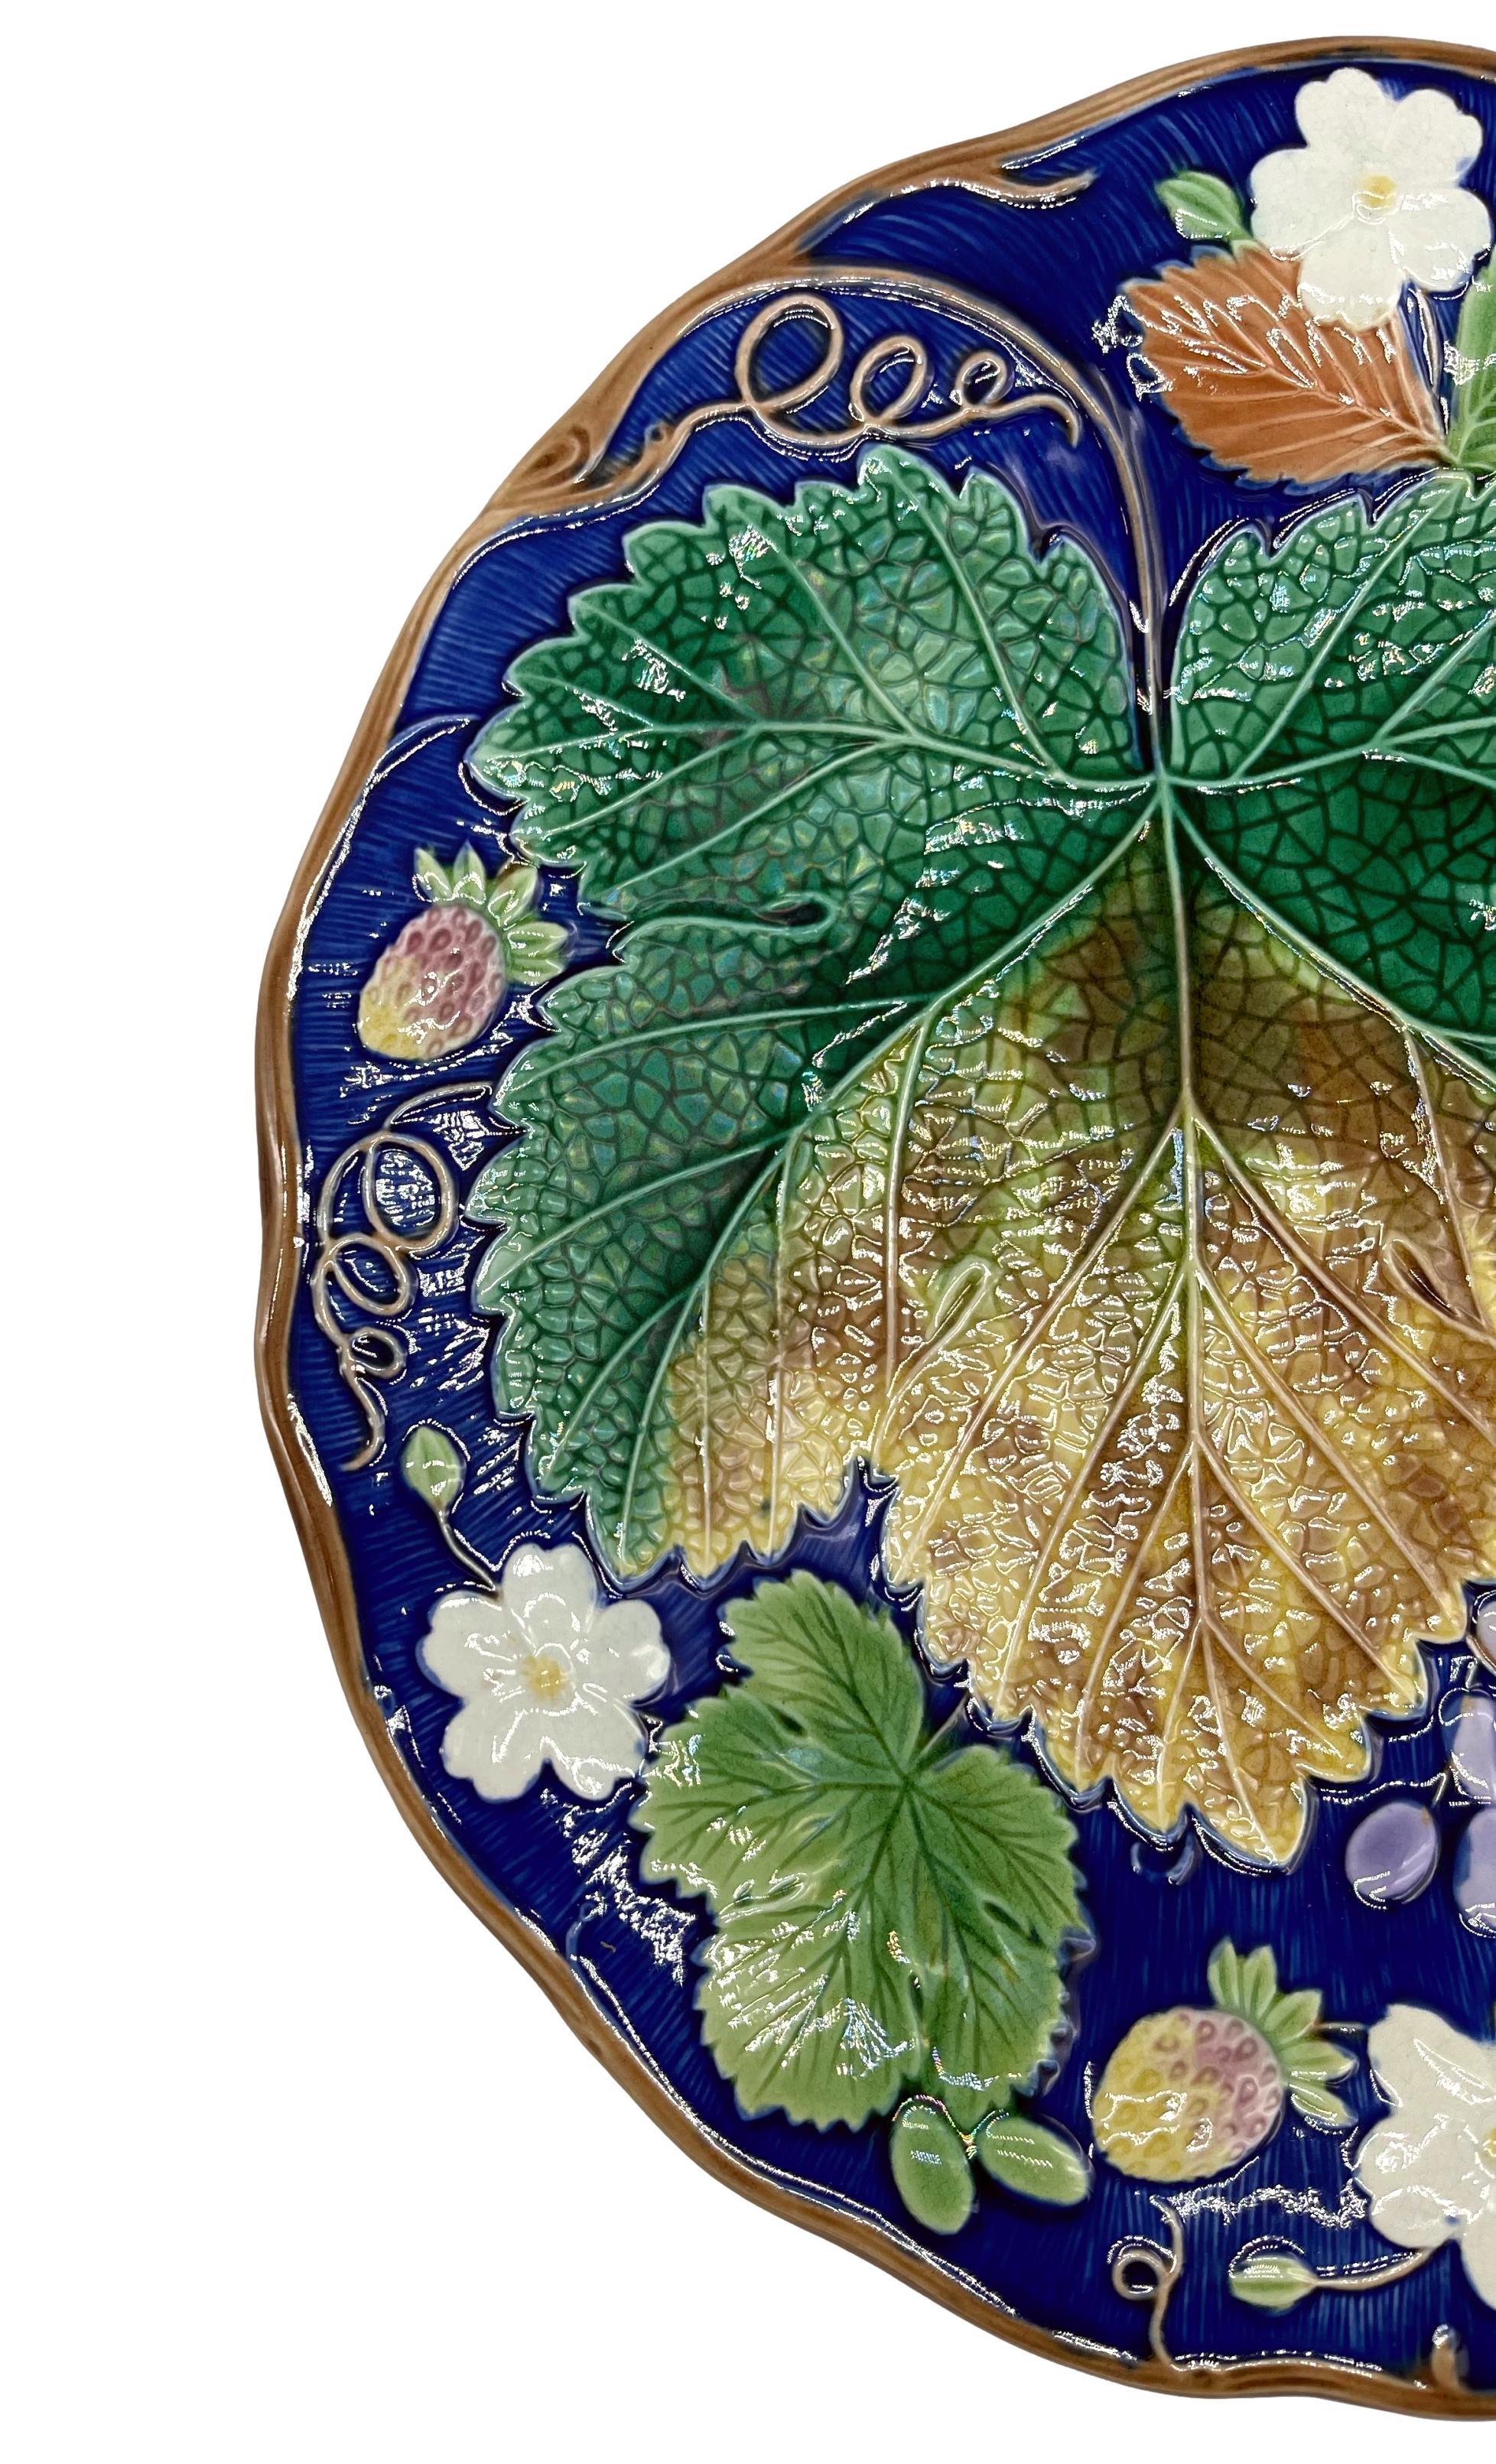 Wedgwood Majolica 'Vine & Strawberry' plate, English, with a large central green grape leaf, purple grapes, strawberries and blossom on a cobalt ground (rare coloration). Impressed marks to reverse: 'WEDGWOOD' and Wedgwood date code for 1878.
For